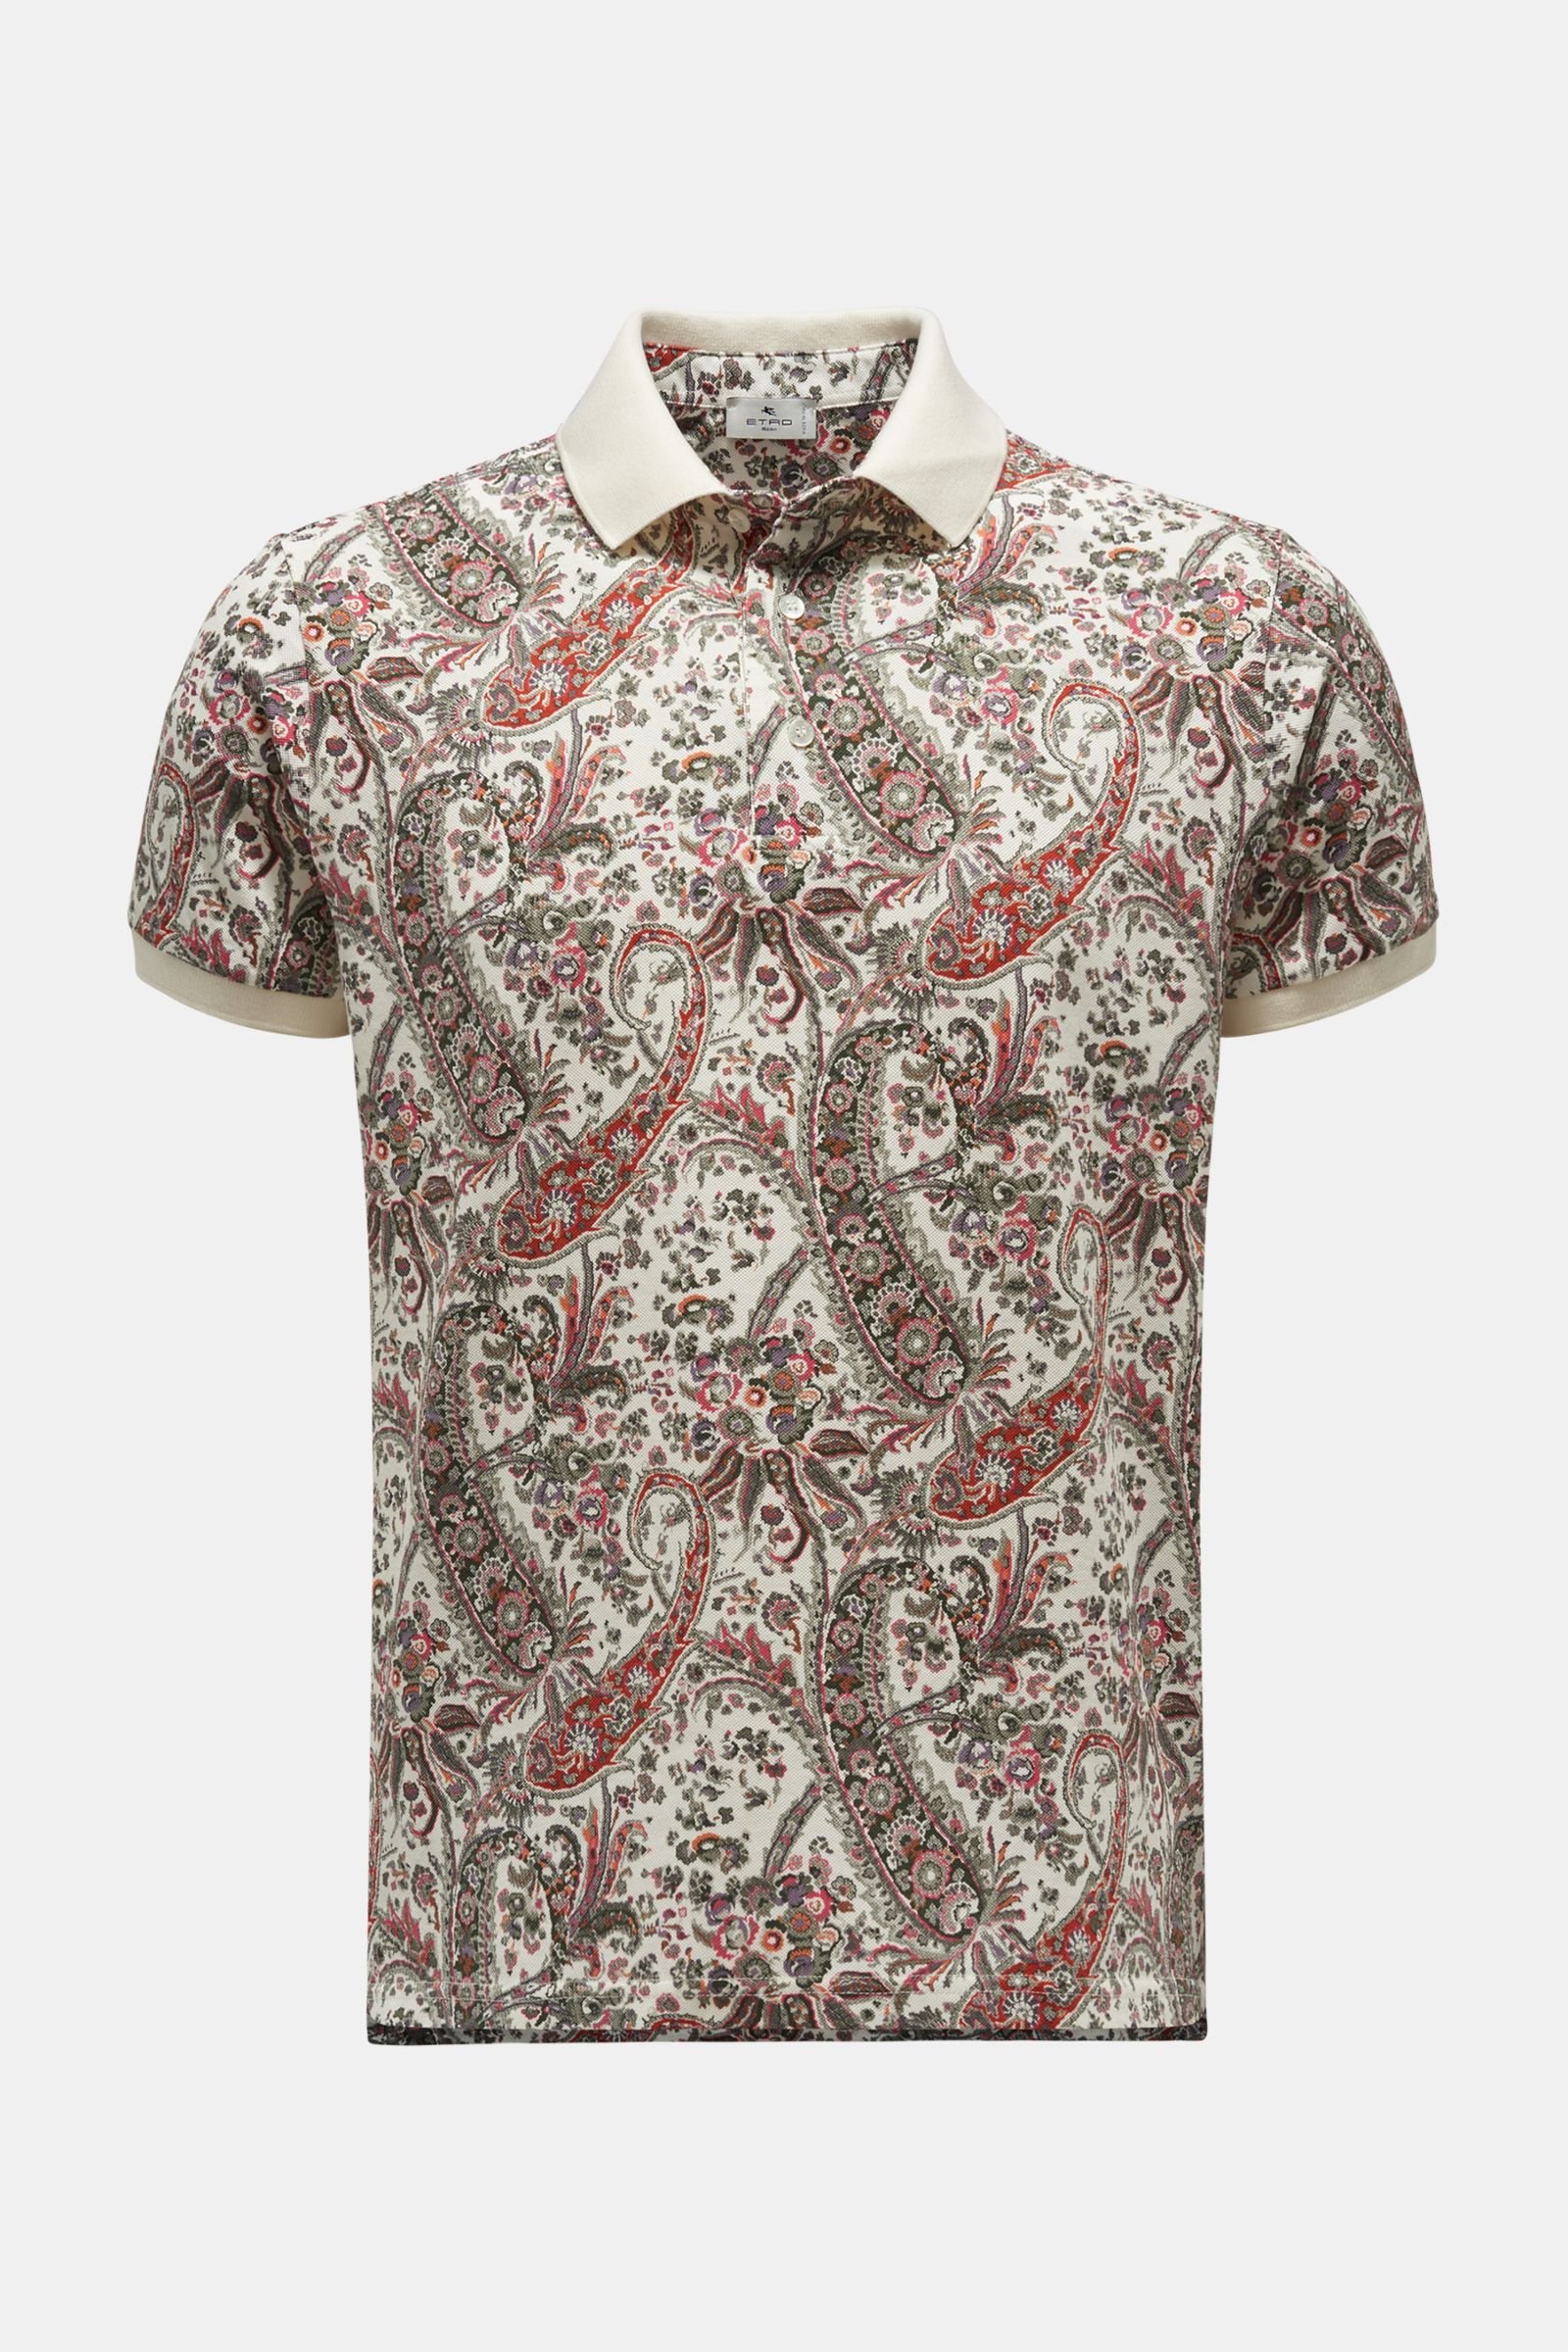 Polo shirt white/olive patterned